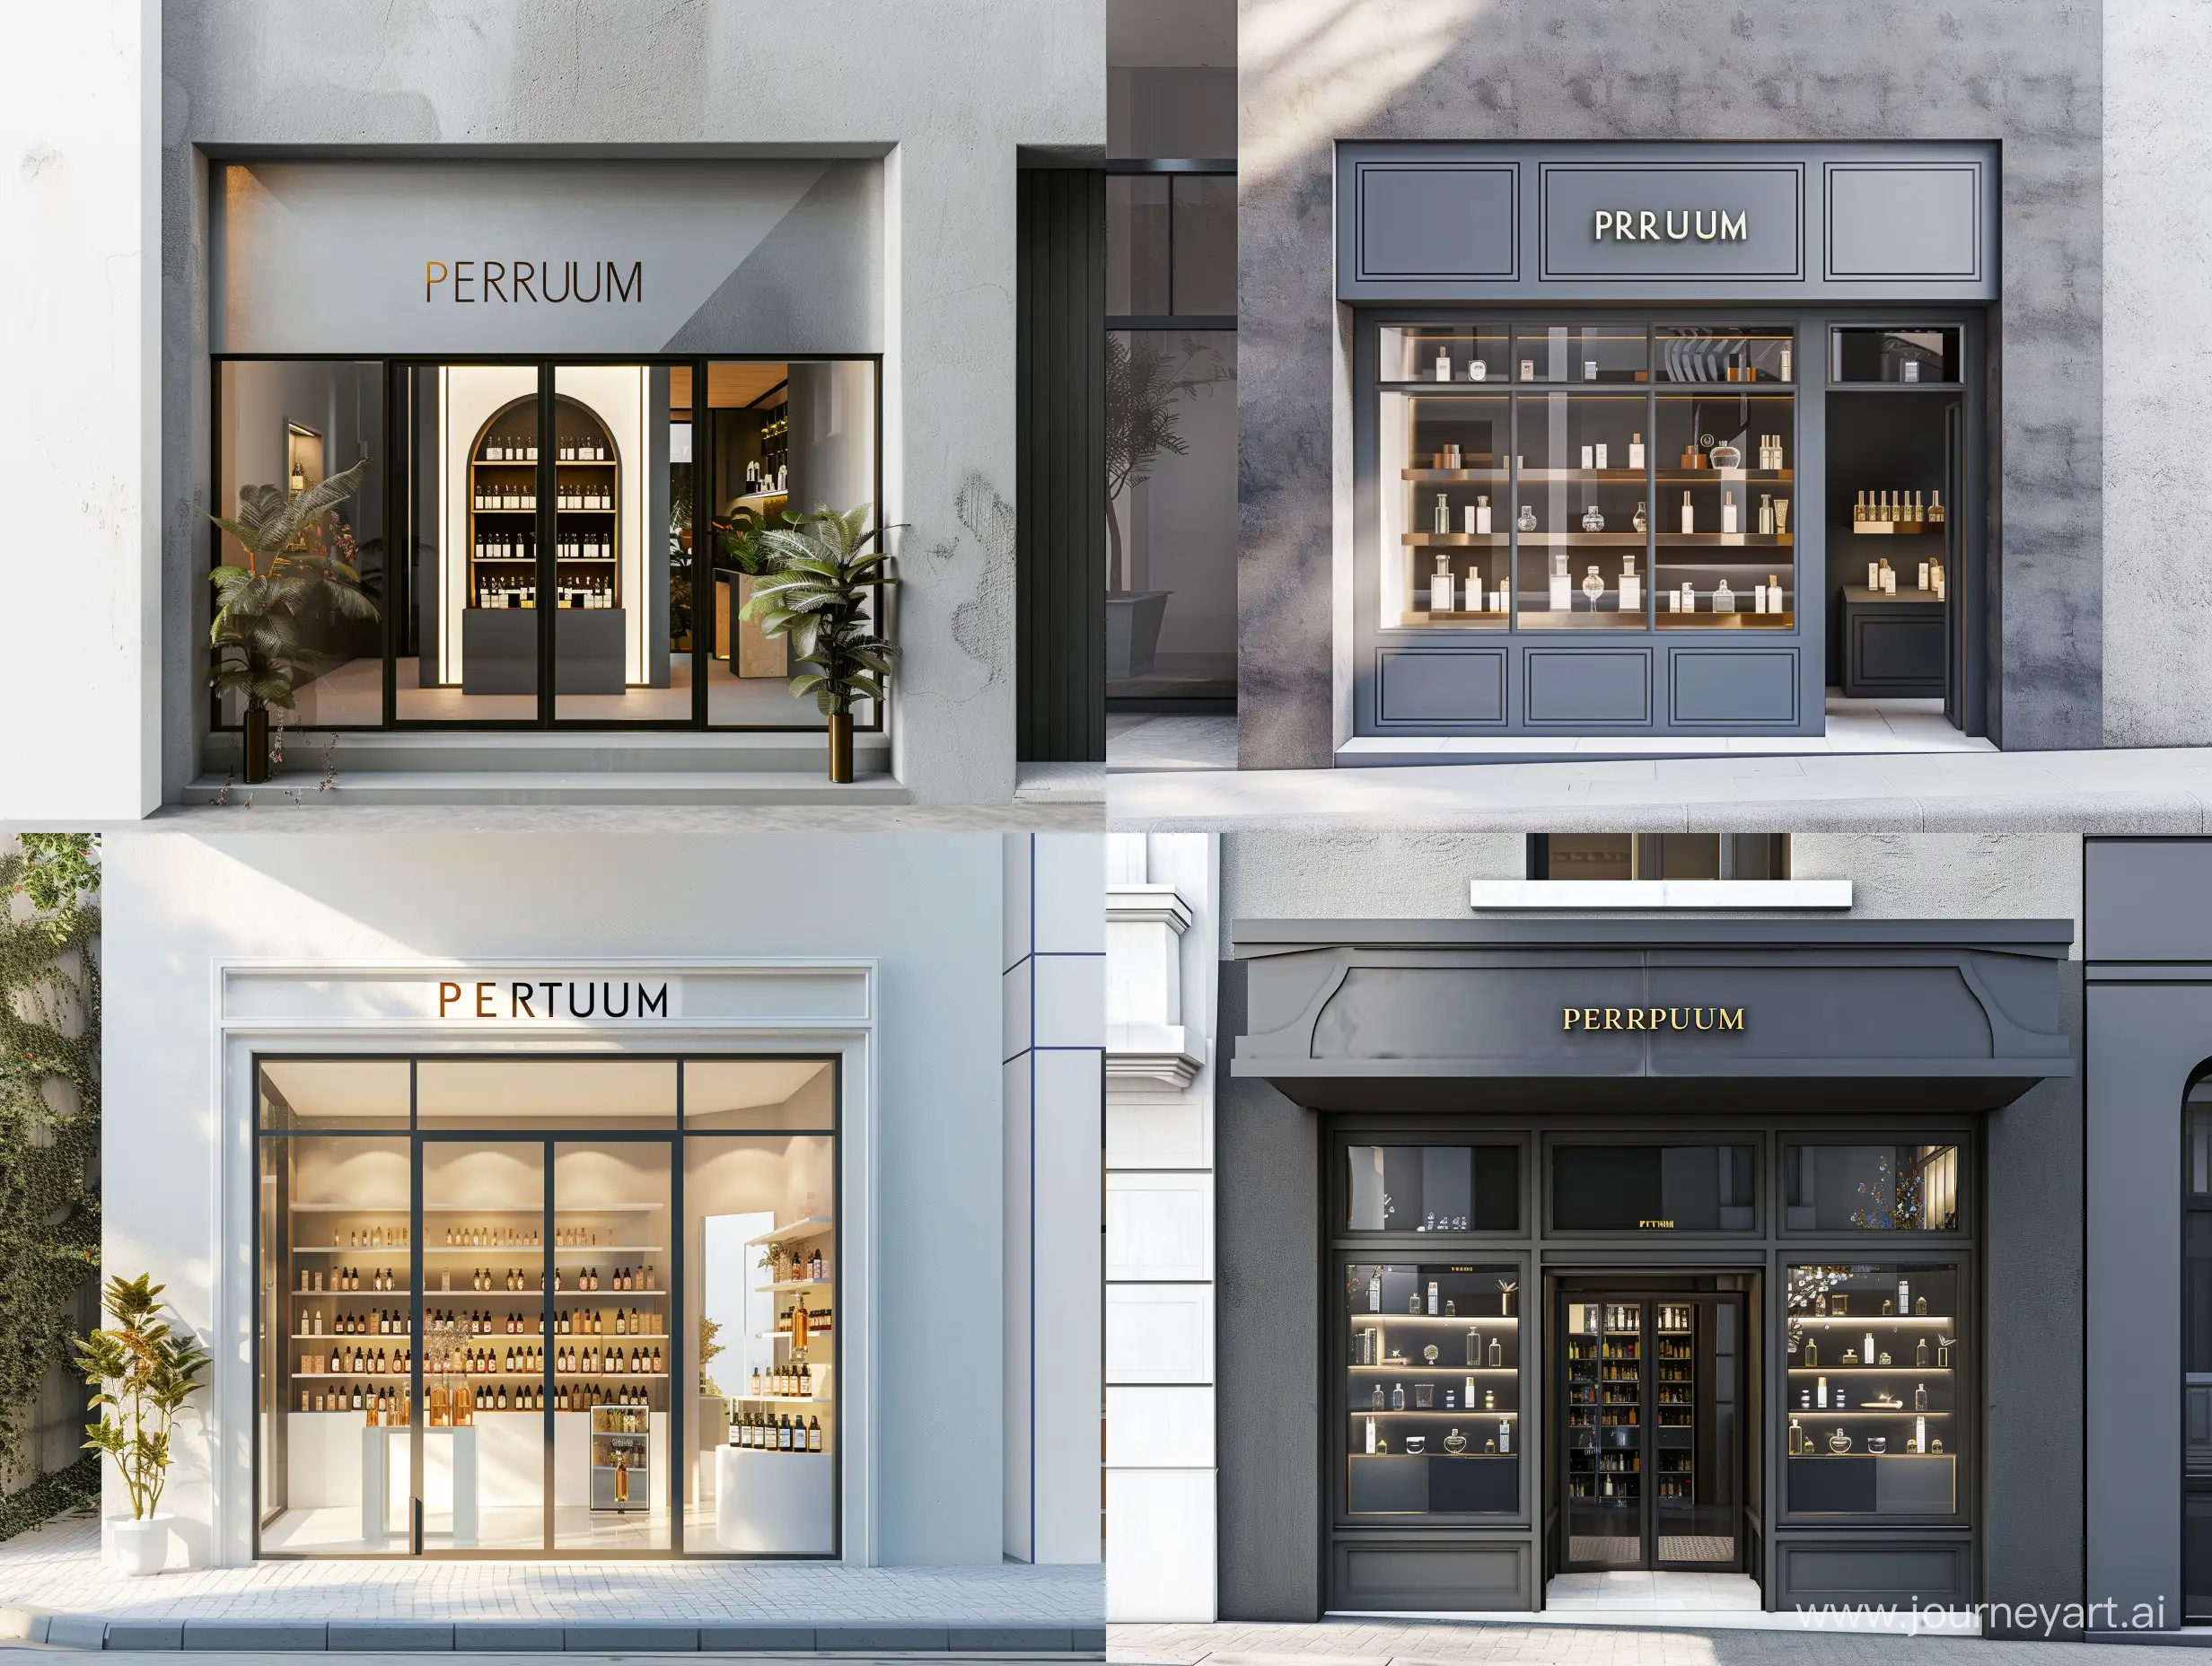 The facade of a small perfume shop called "PERFUM", simple, luxury